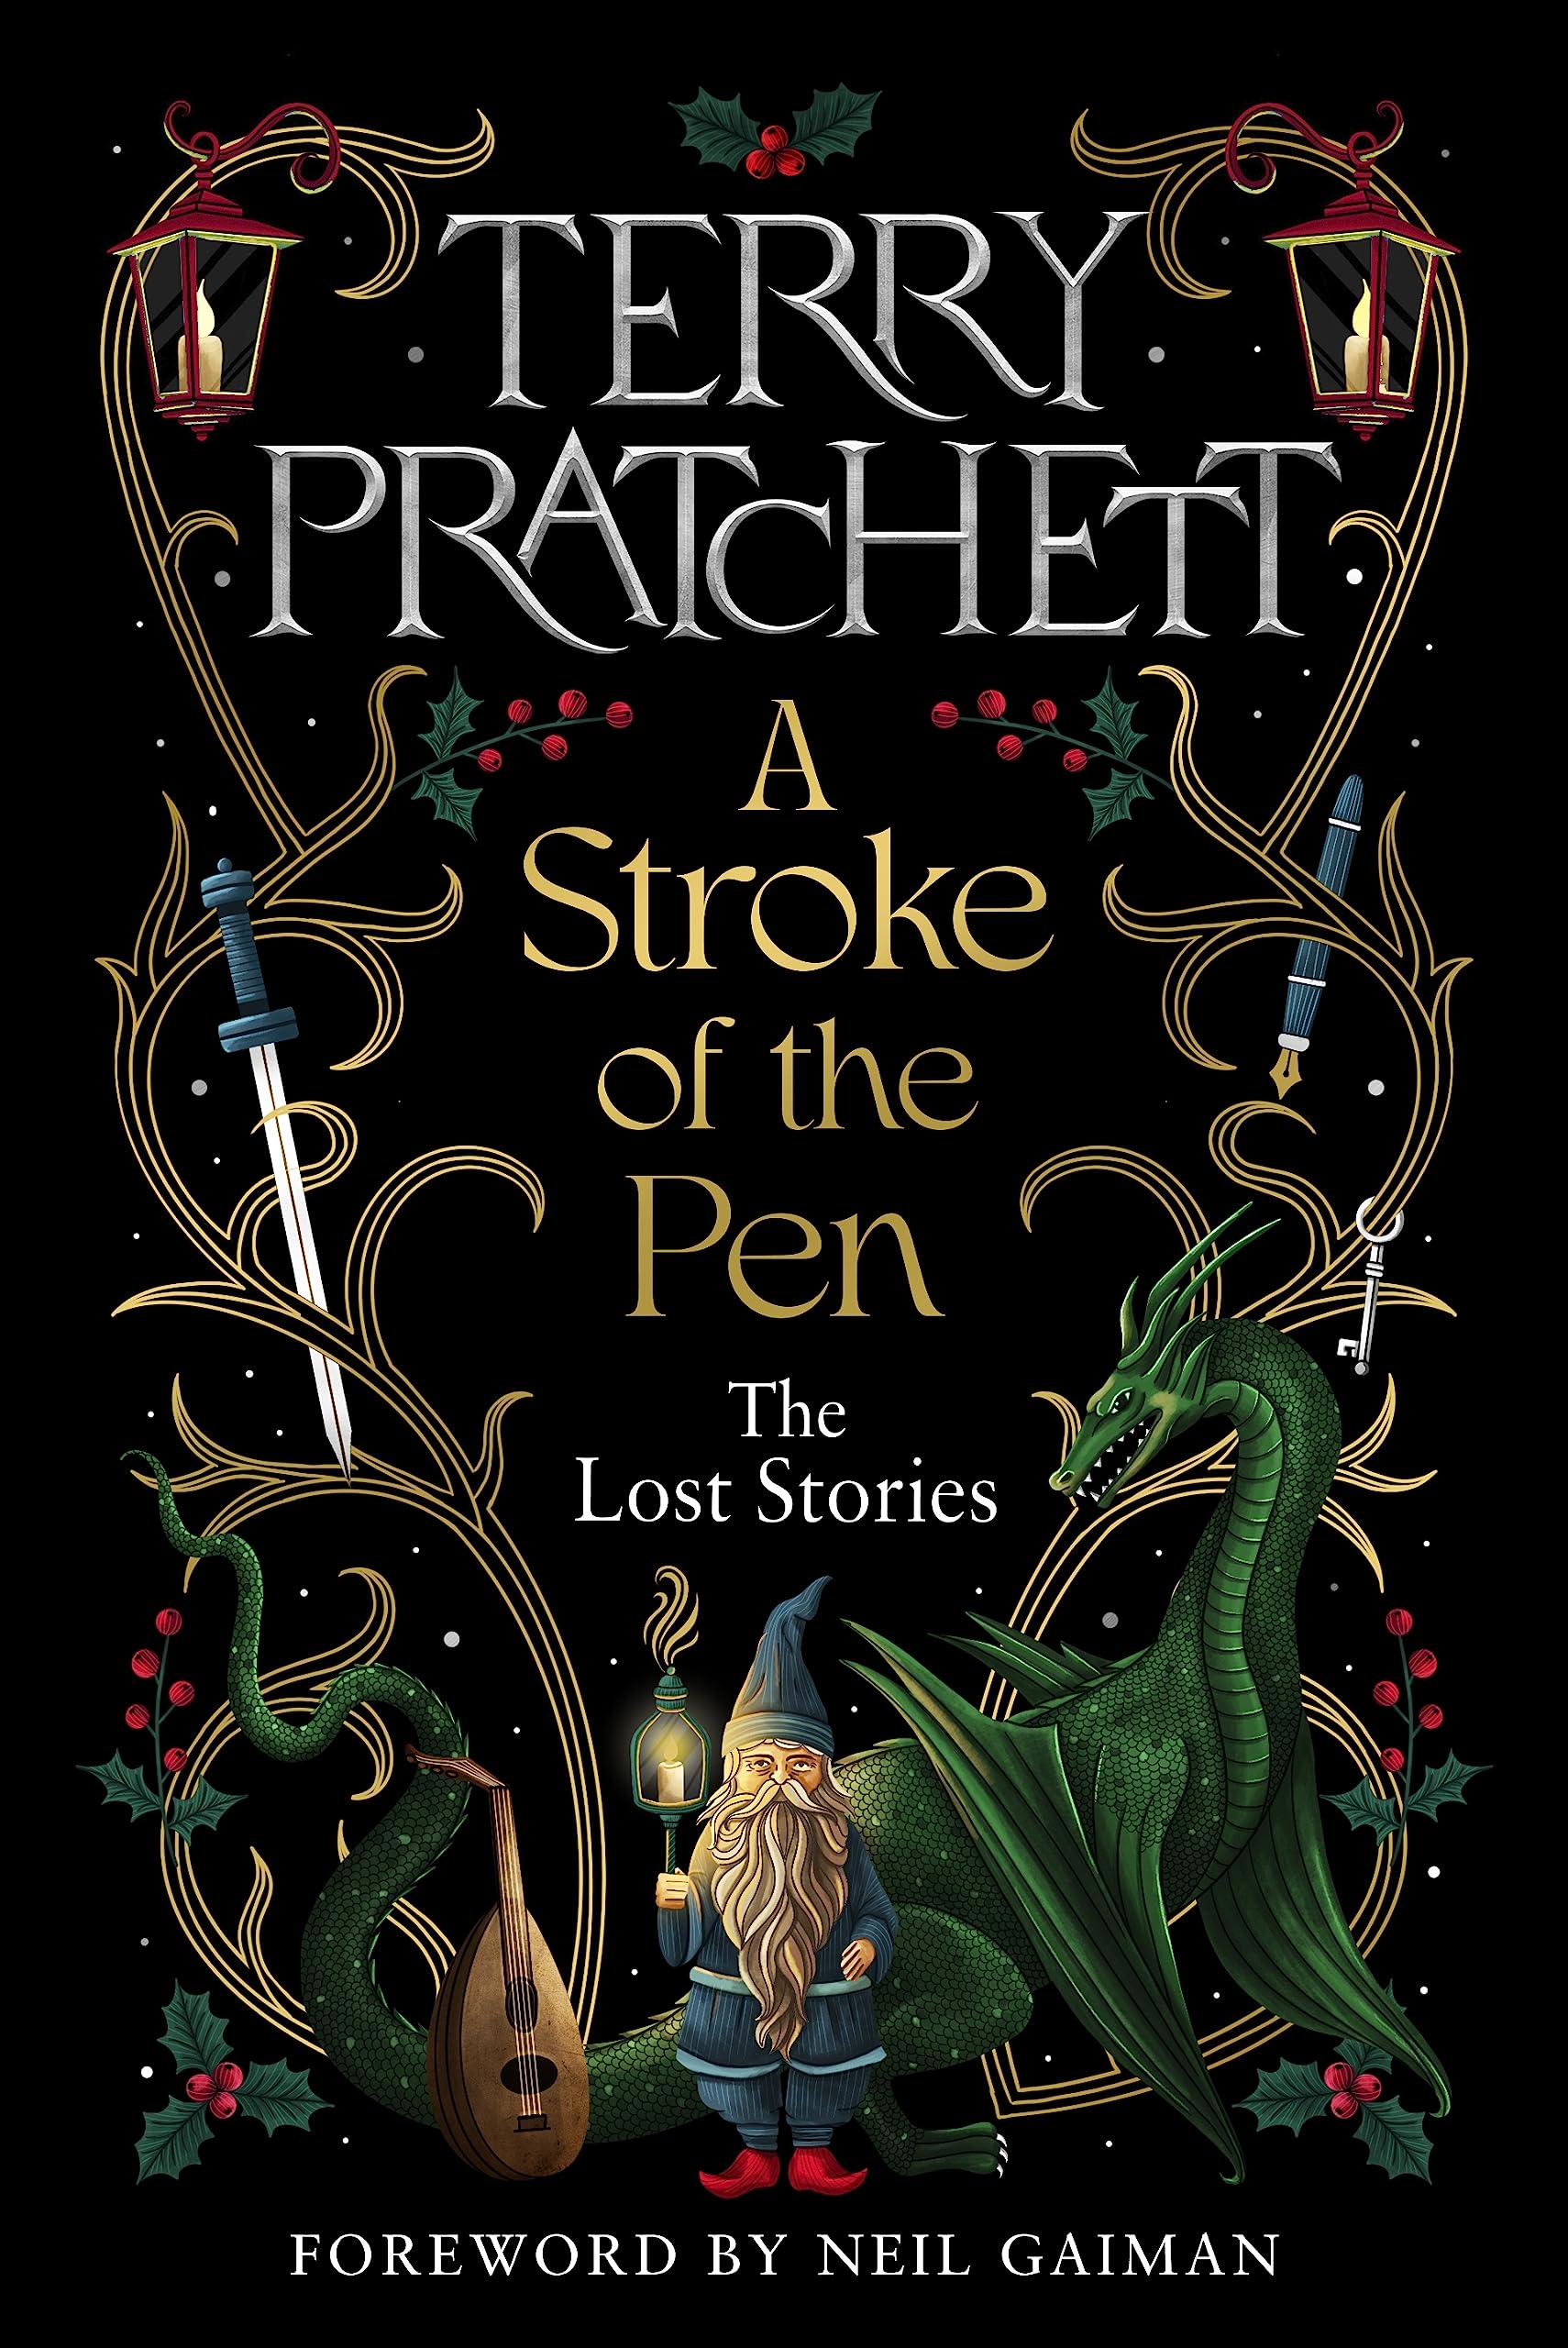 The front cover of Terry Pratchett's collection of early short stories entitled 'A Stroke of the Pen. The Lost Stories' 